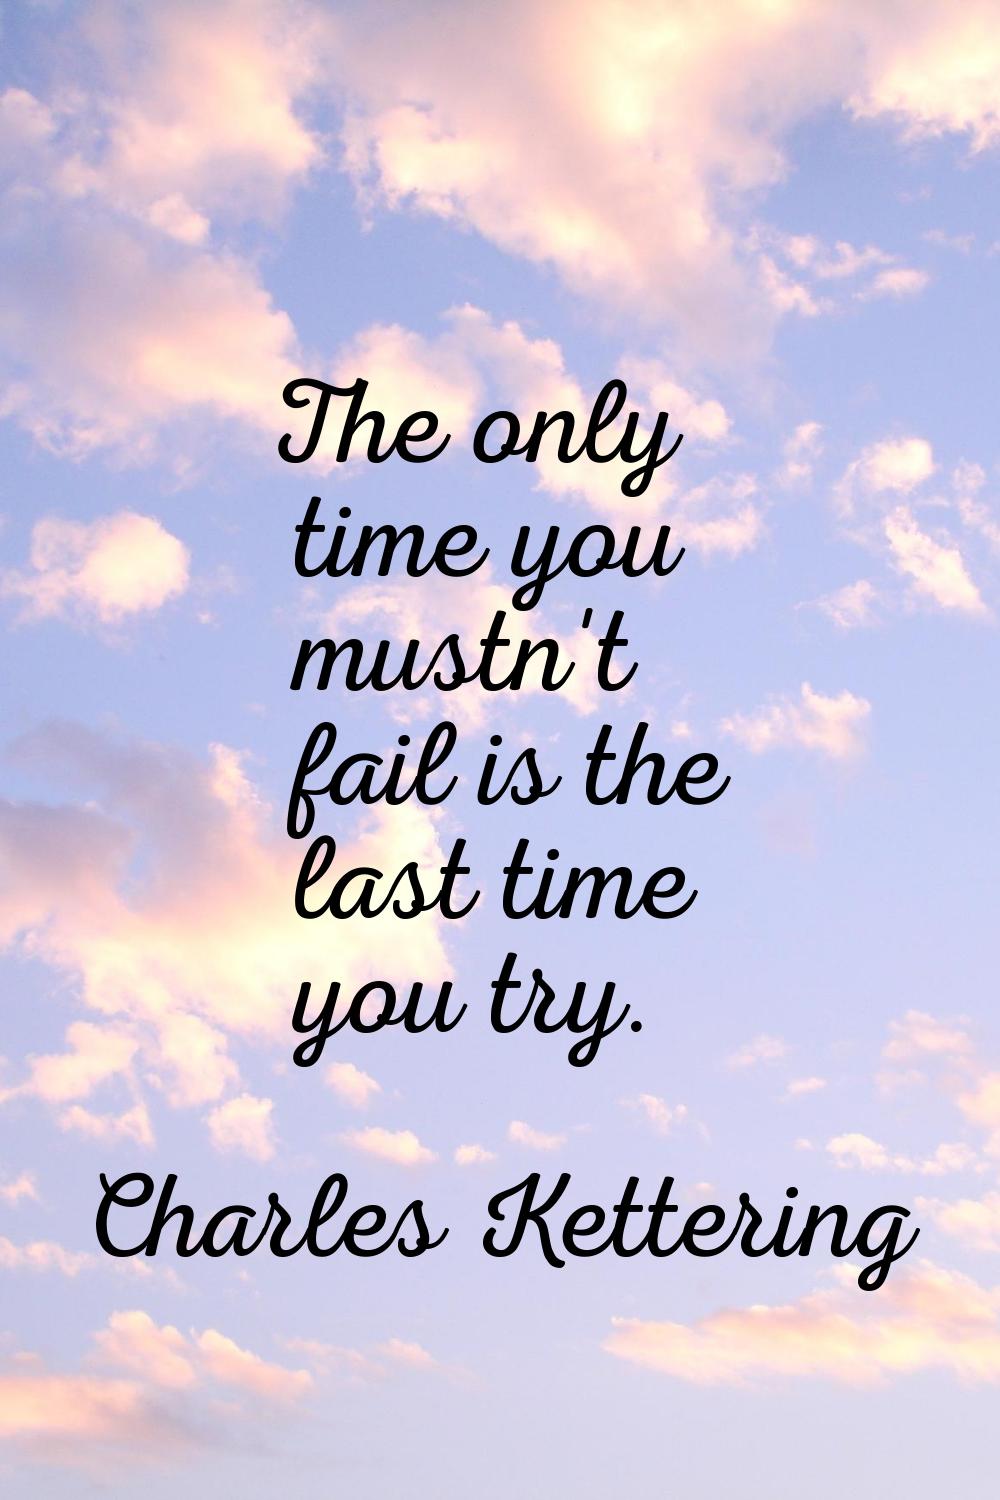 The only time you mustn't fail is the last time you try.